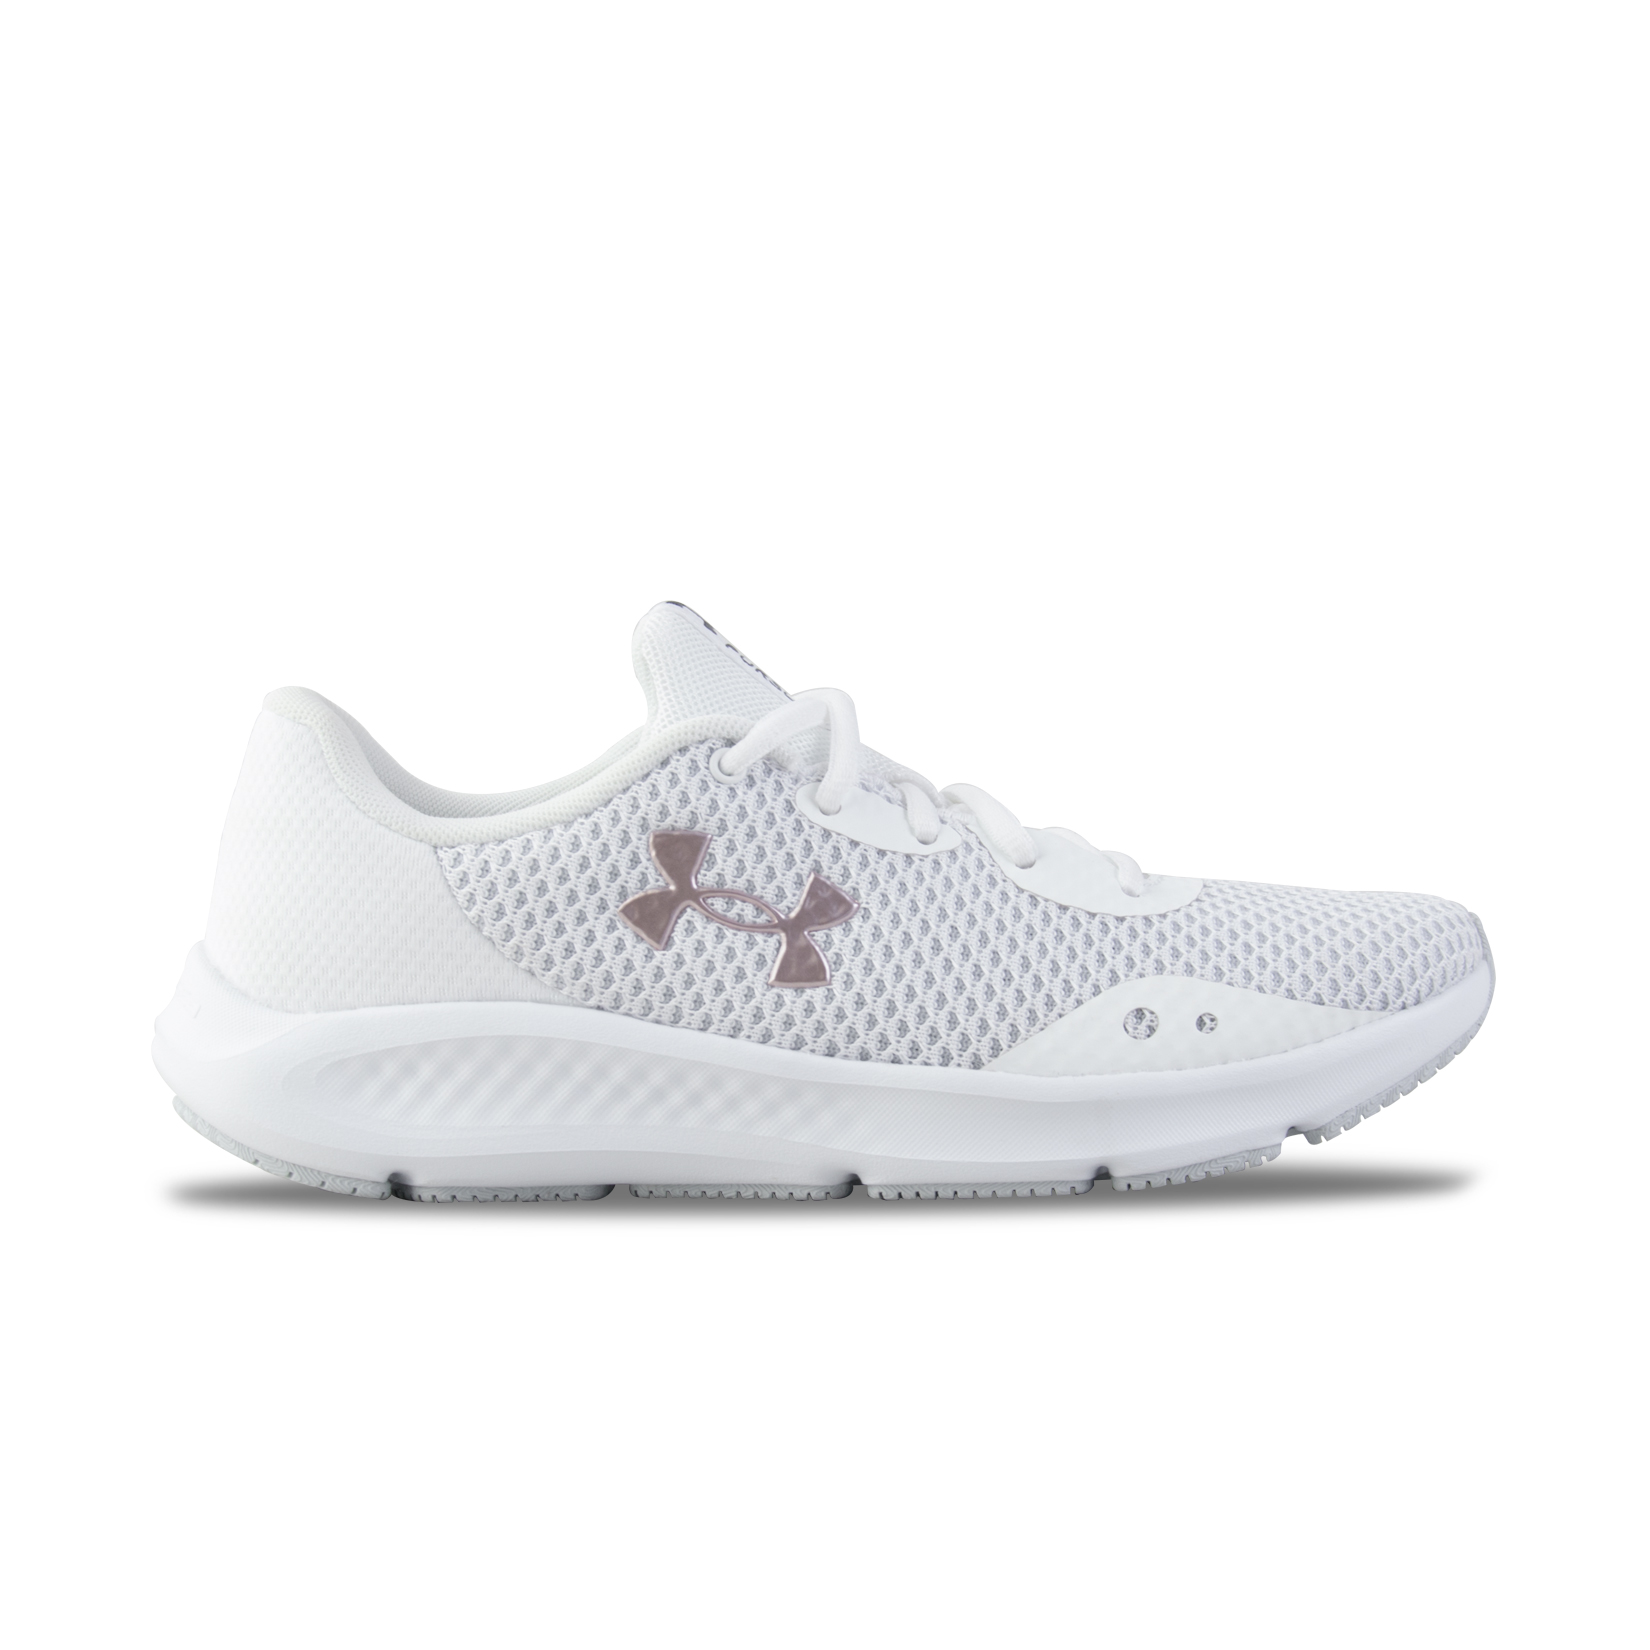 Under Armour Metallic Charged Pursuit 3 Γυναικειο Παπουτσι Λευκο